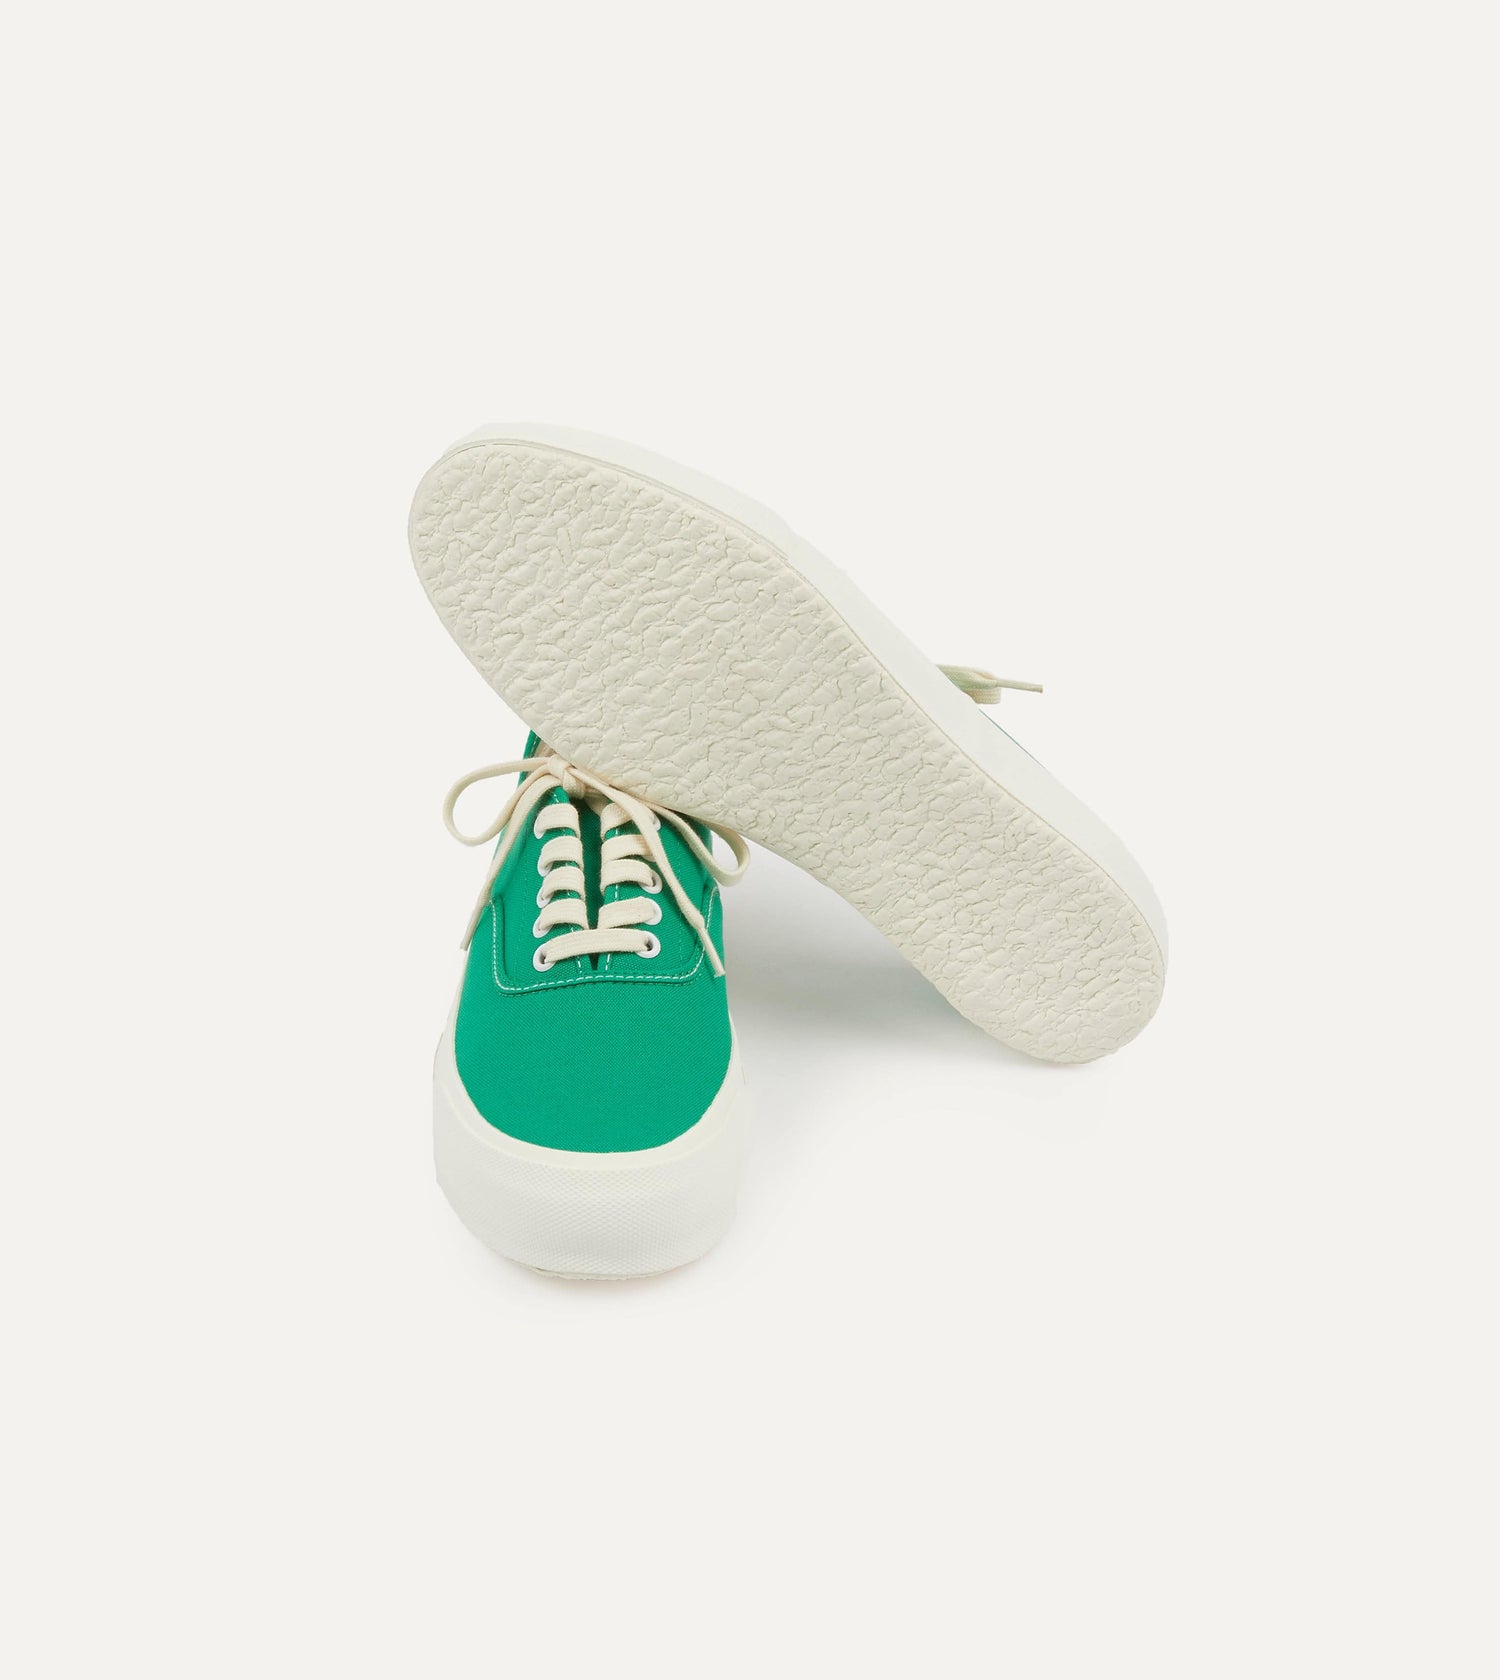 Doek Green Canvas Oxford Trainers